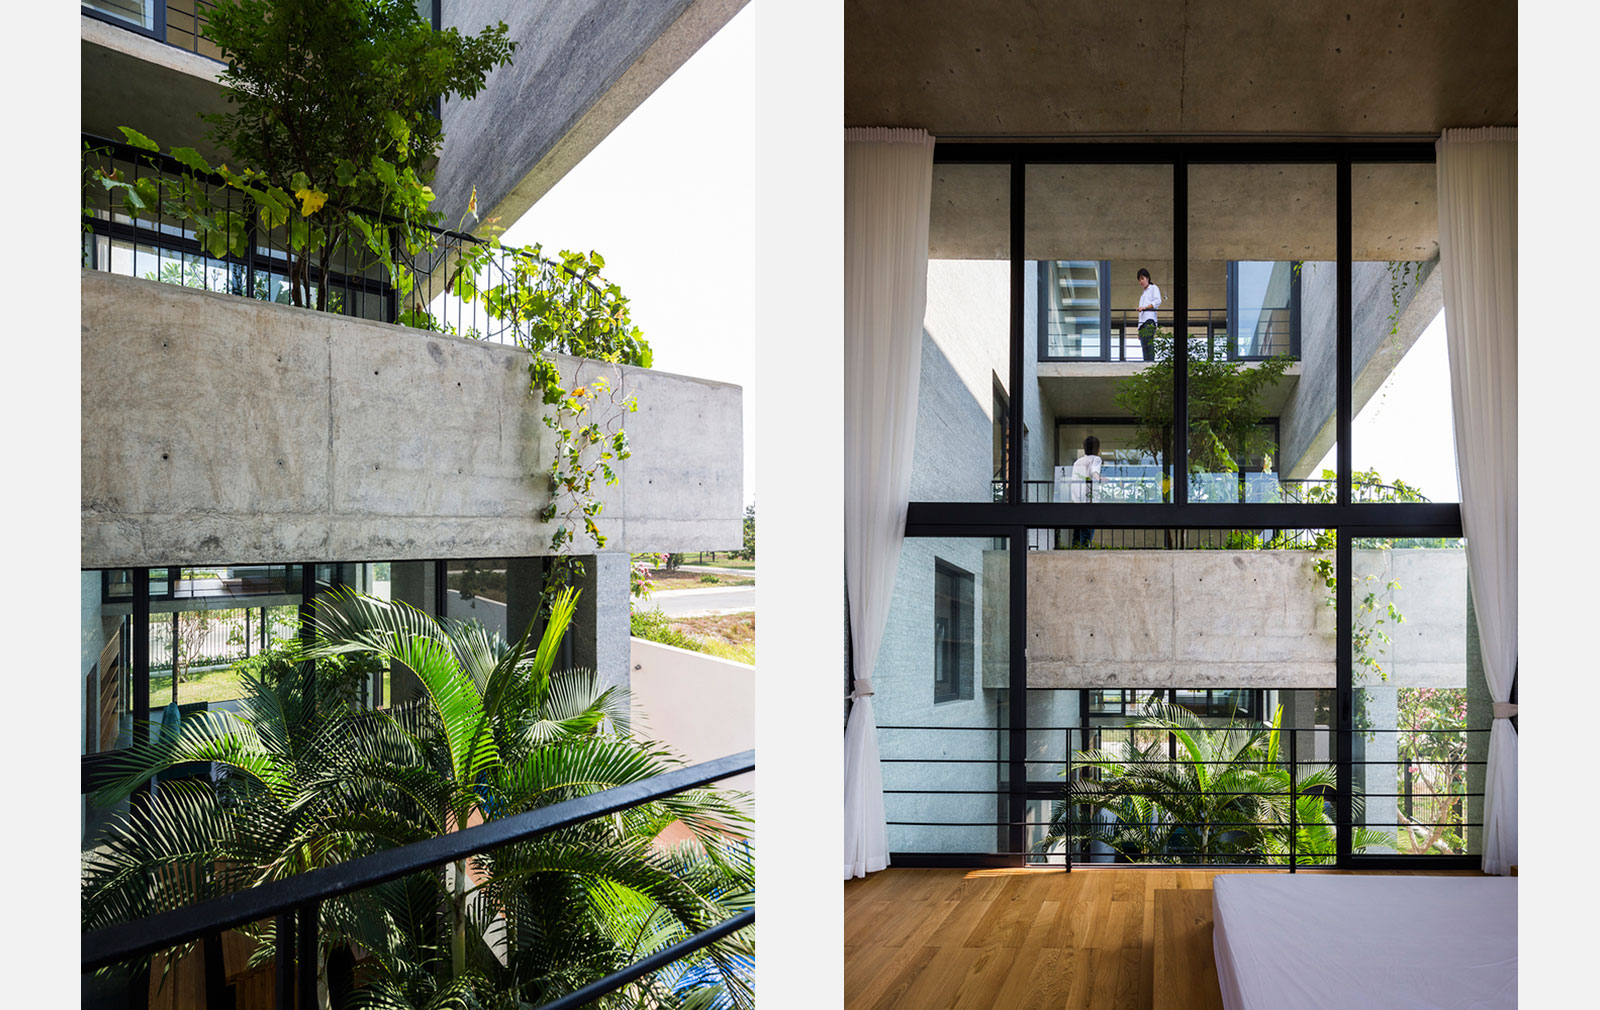 Binh House, by Vo Trong Nghia Architects in Ho Chi Minh City, Vietnam